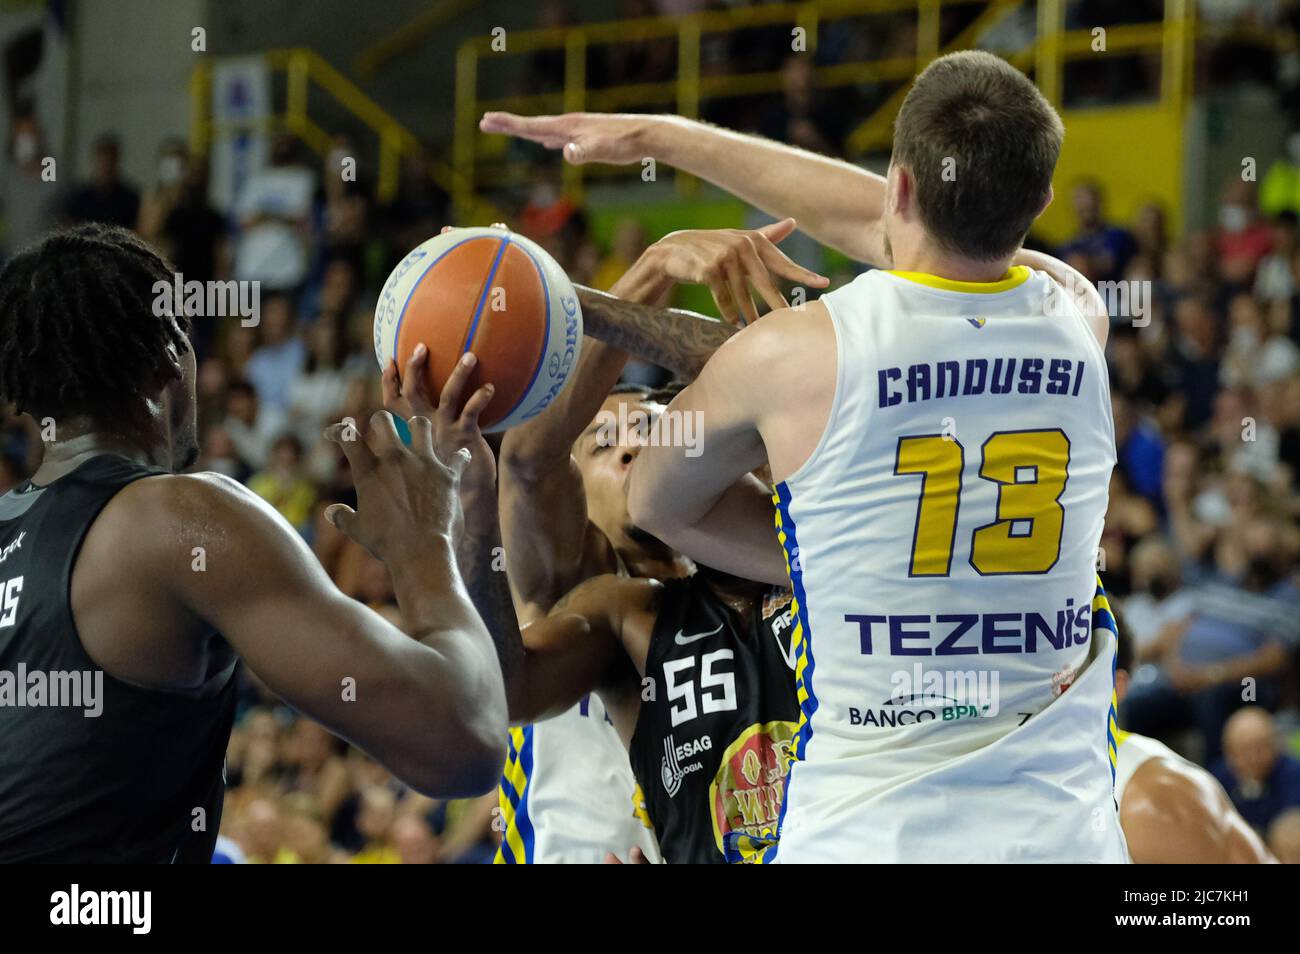 Verona, Italy. 10th June, 2022. Trevor Lacey - APU Old Wild West Udine  during Playoff finals - 3rd match - Tezenis Verona VS APU Udine, Italian Basketball  Serie A2 Men Championship in